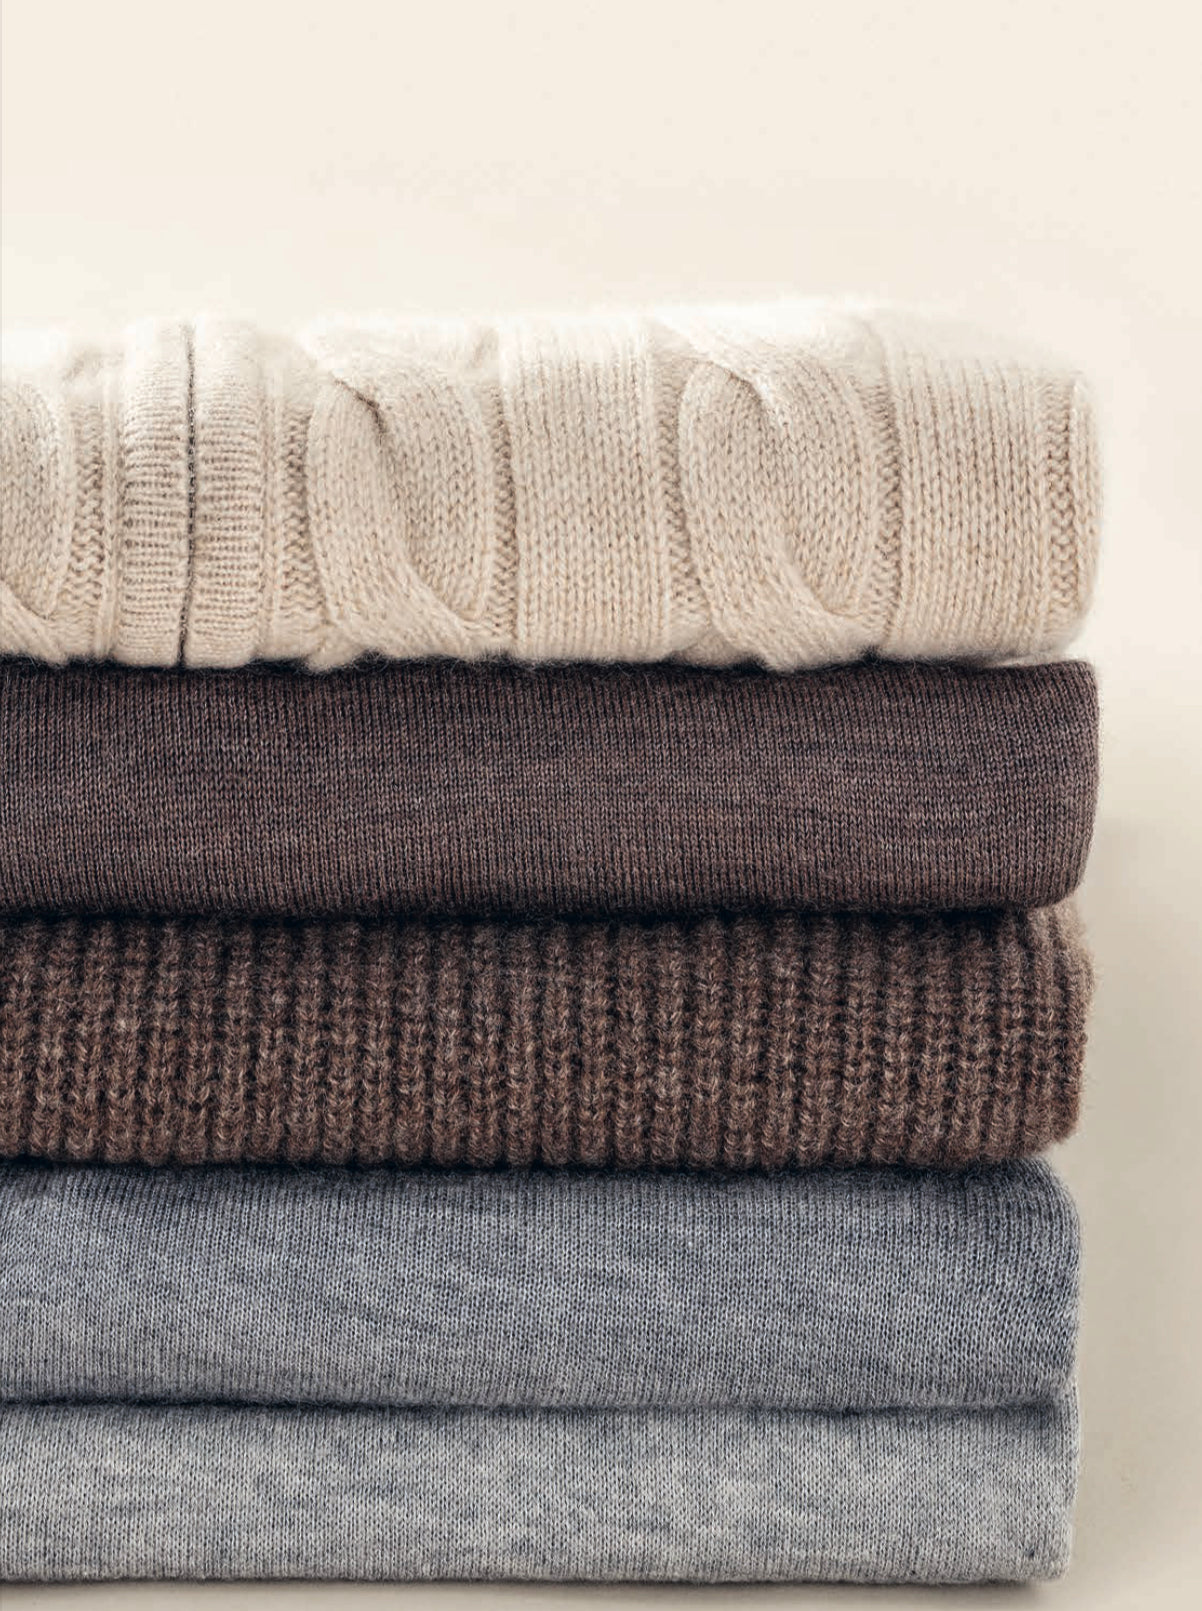 Our Knitwear Qualities Explained